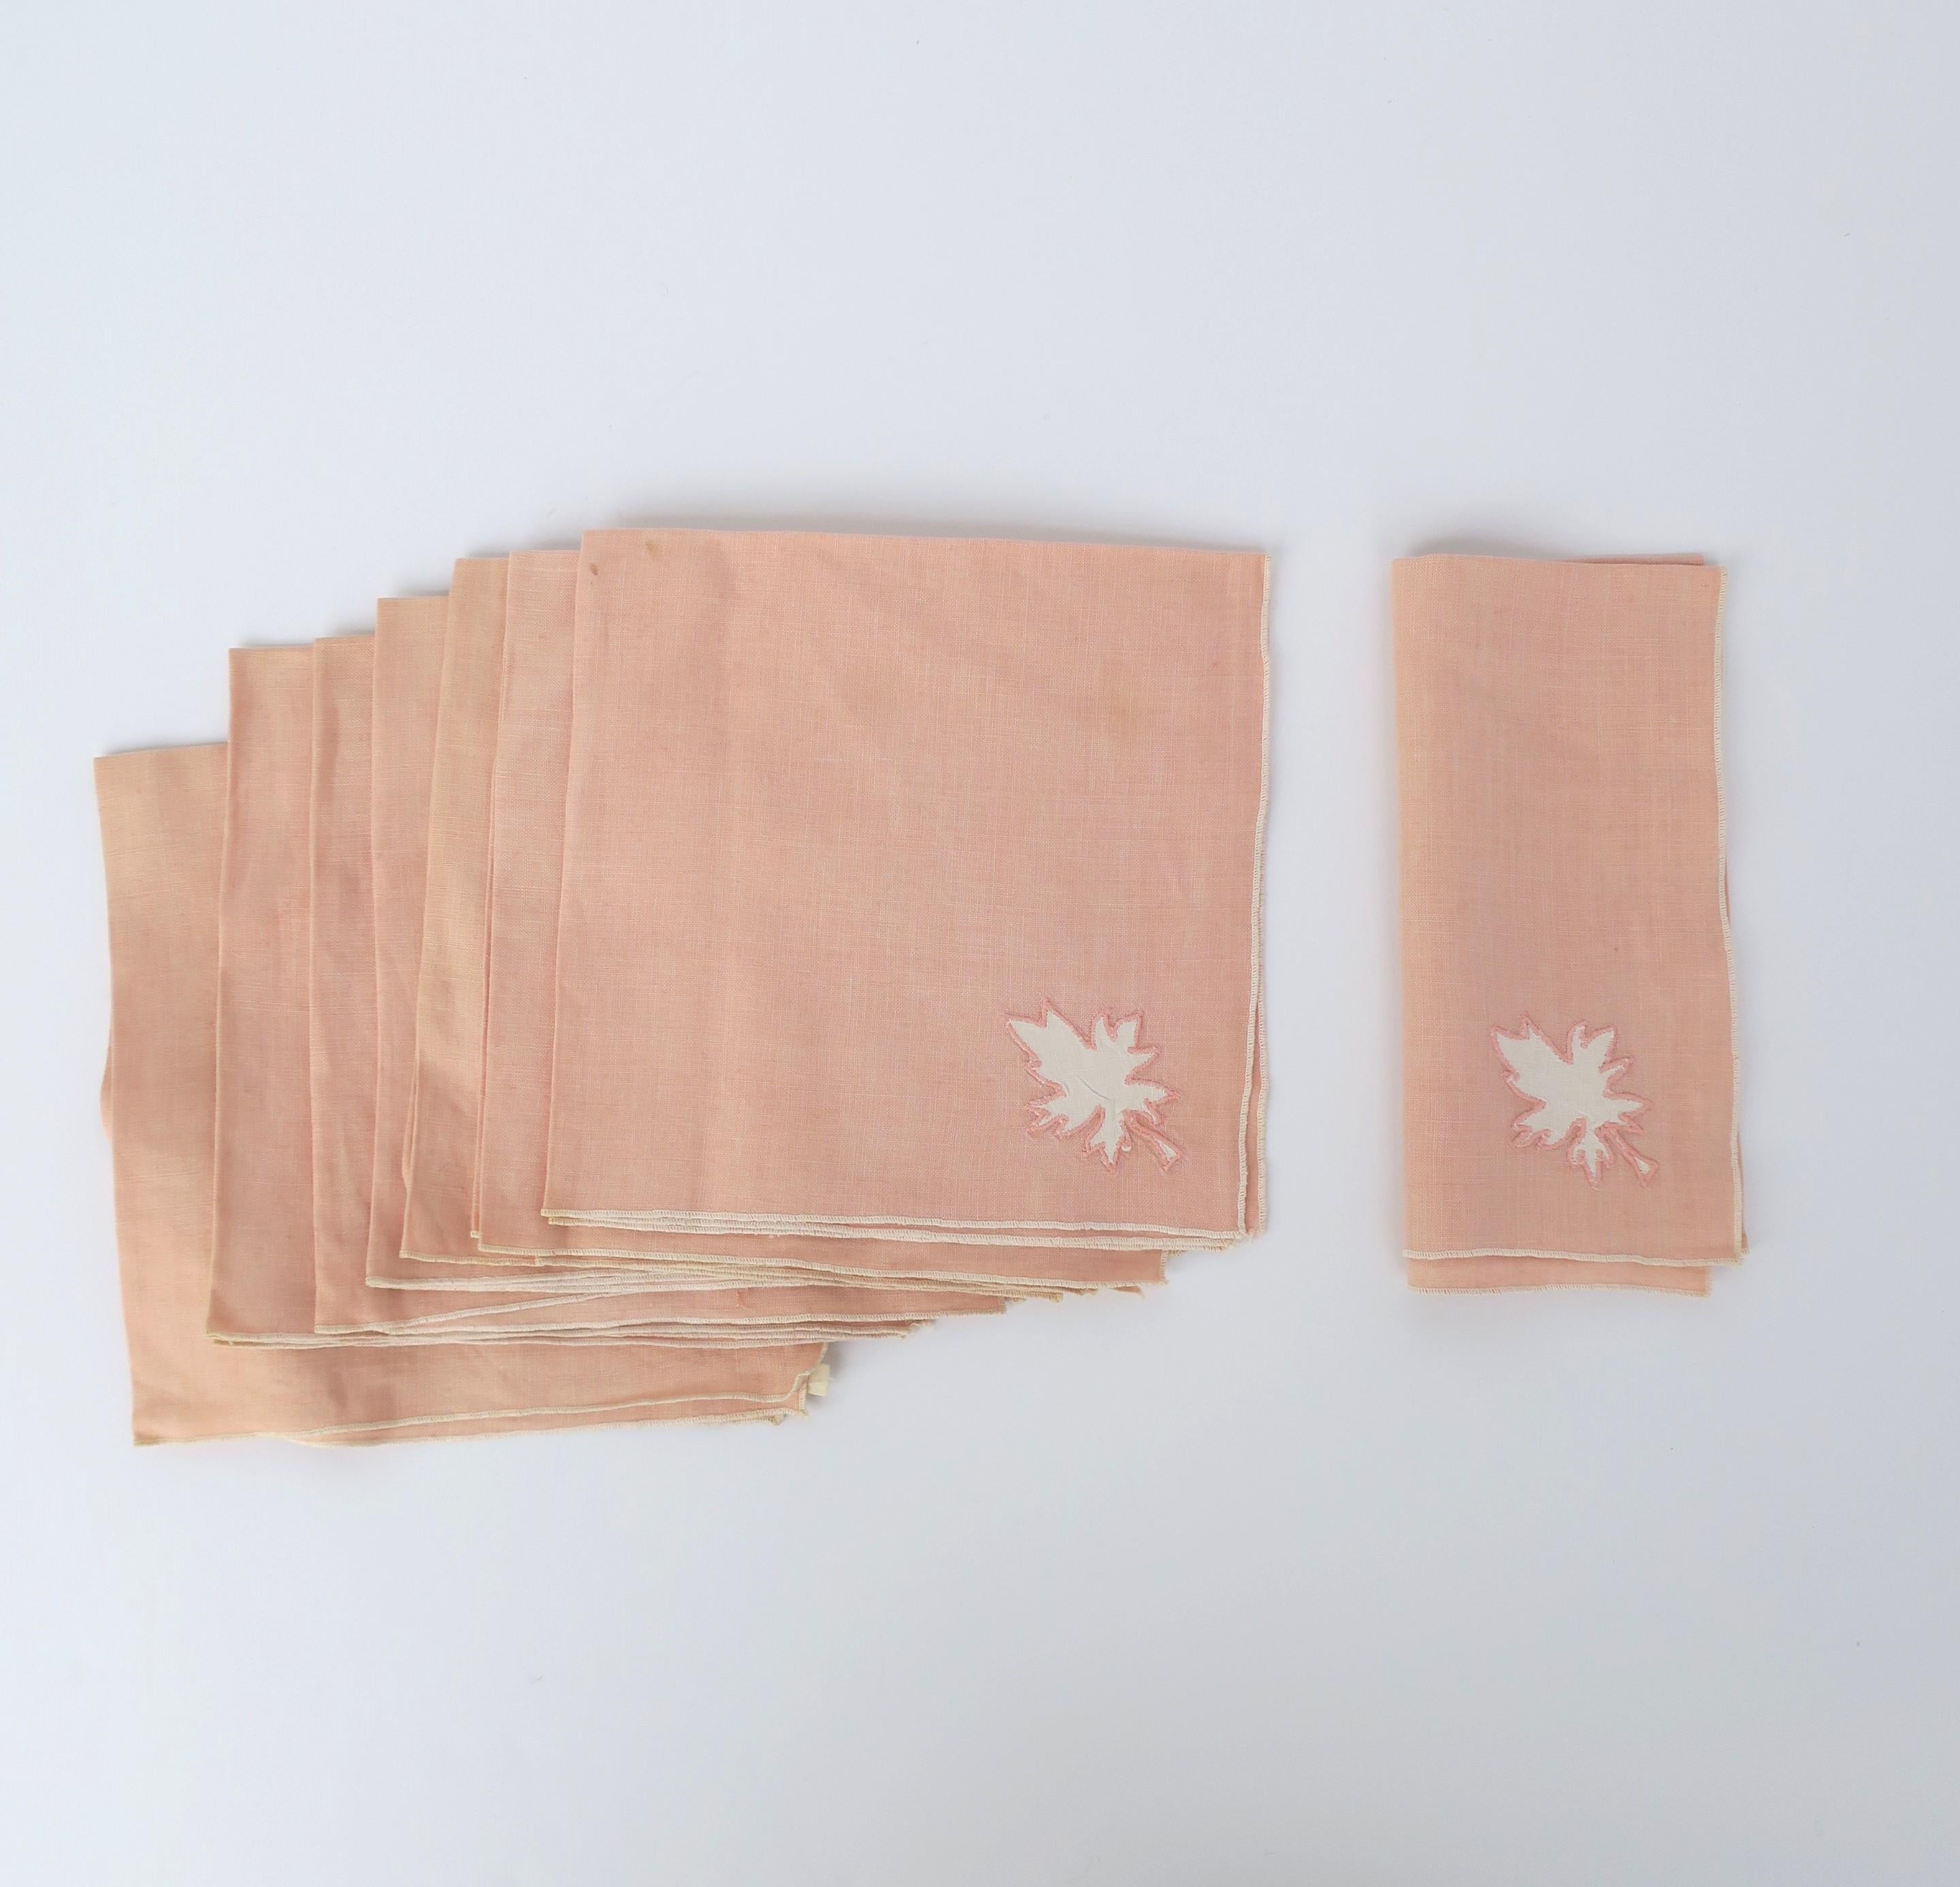 A beautiful set of eight (8) fine pink linen napkins with white leaf detail, circa 20th century. A great set for indoor or outdoor dining including picnic, patio, pool, garden, dining room, etc., breakfast, lunch, dinner. A great addition to any